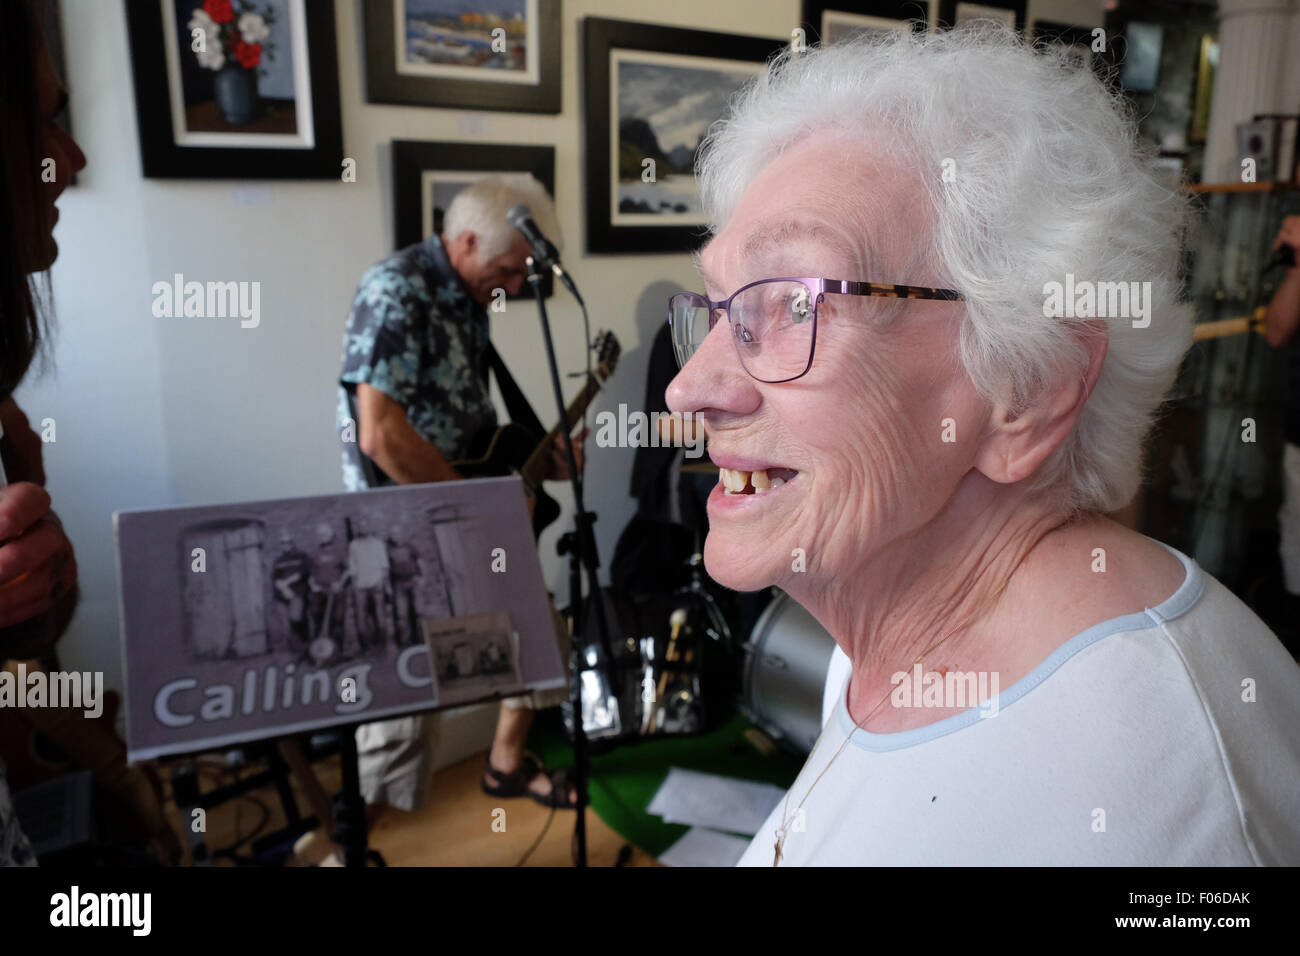 Brecon, Powys, Wales, UK. 8th Aug, 2015. An elderly woman enjoys the live music among the art inside the Ardent Gallery in Brecon town centre one of many live music venues during the Brecon Festival weekend. Stock Photo